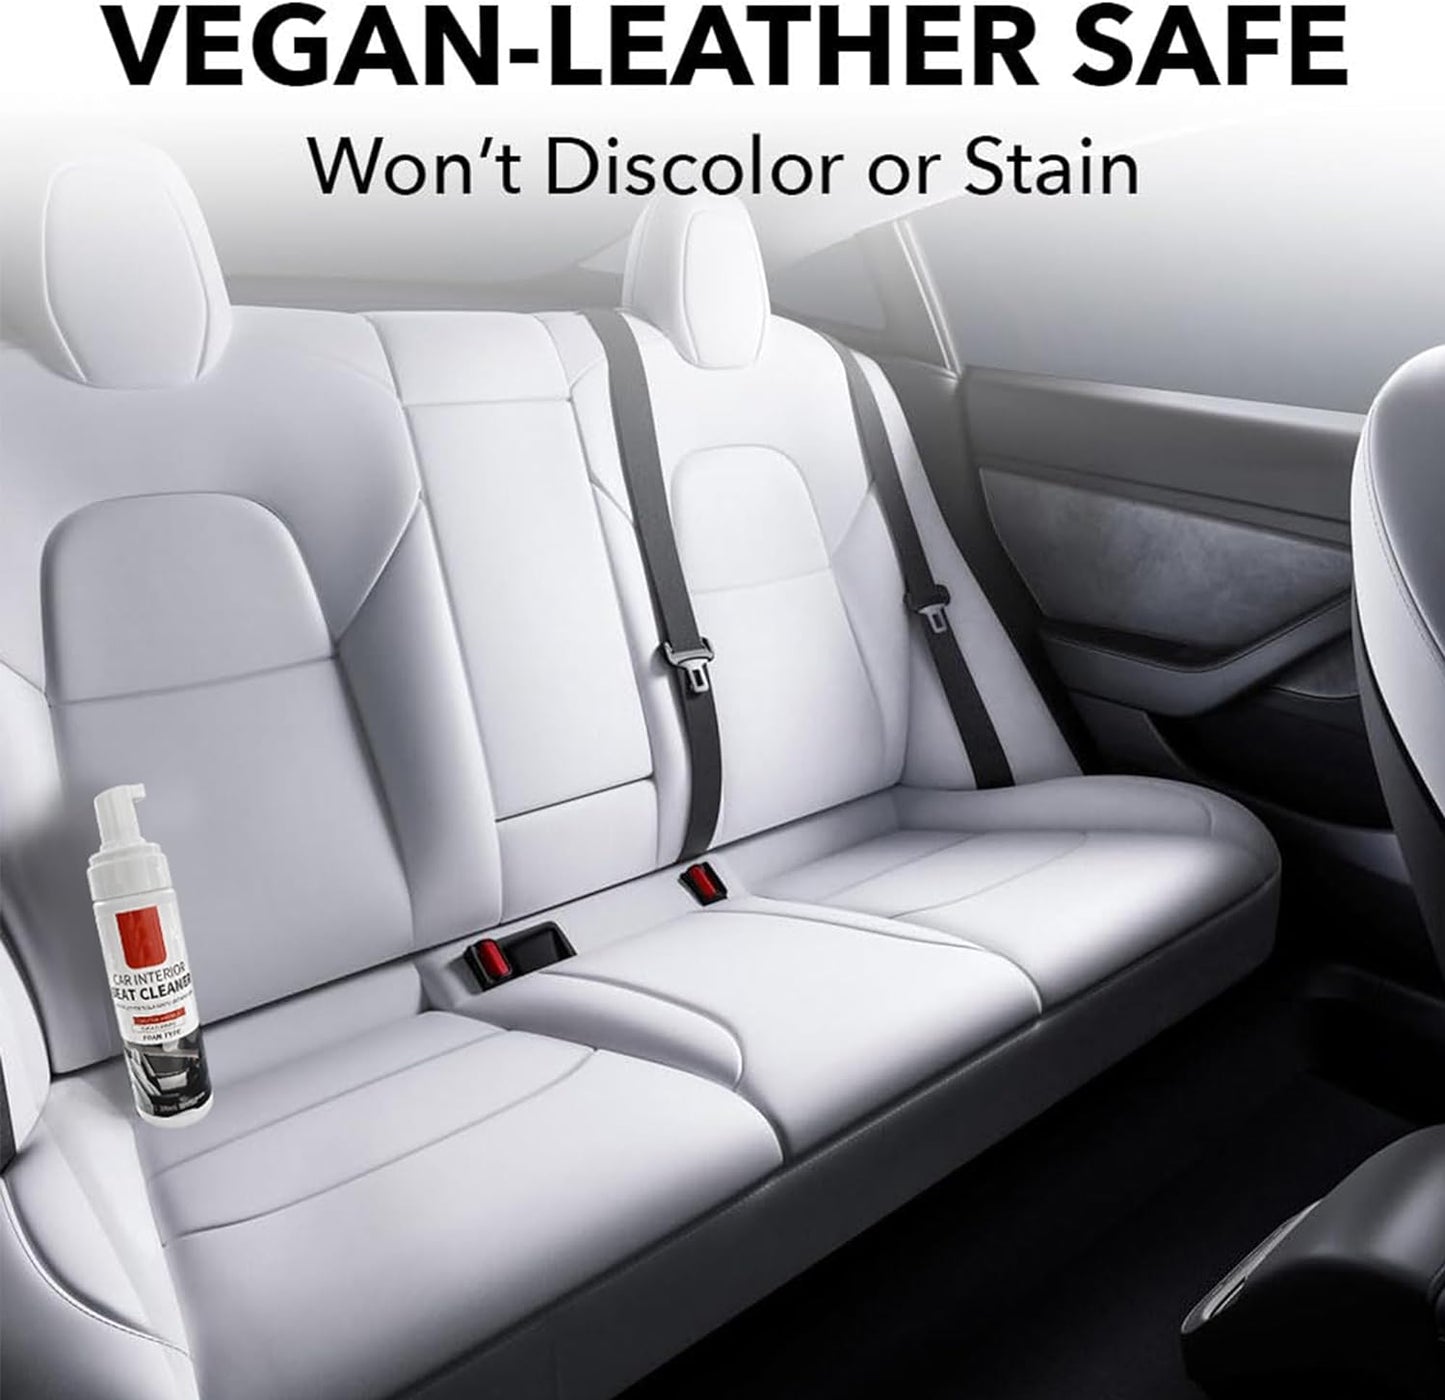 TOPABYTE White Leather Seat Cleaner